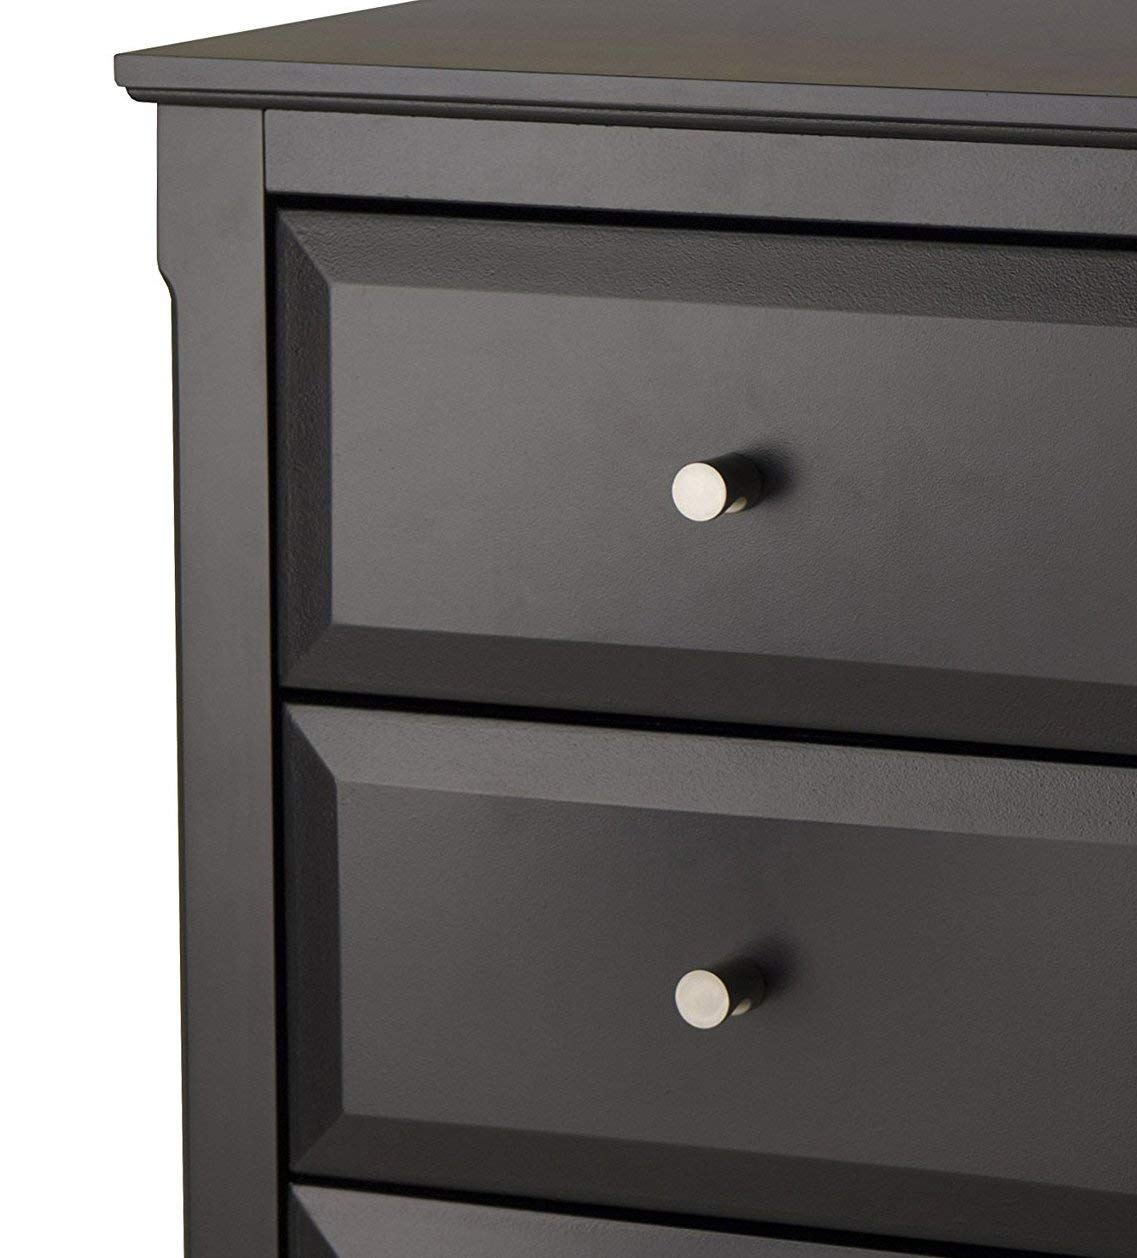 Winsome Timmy Nightstand, Black Finish - image 4 of 4